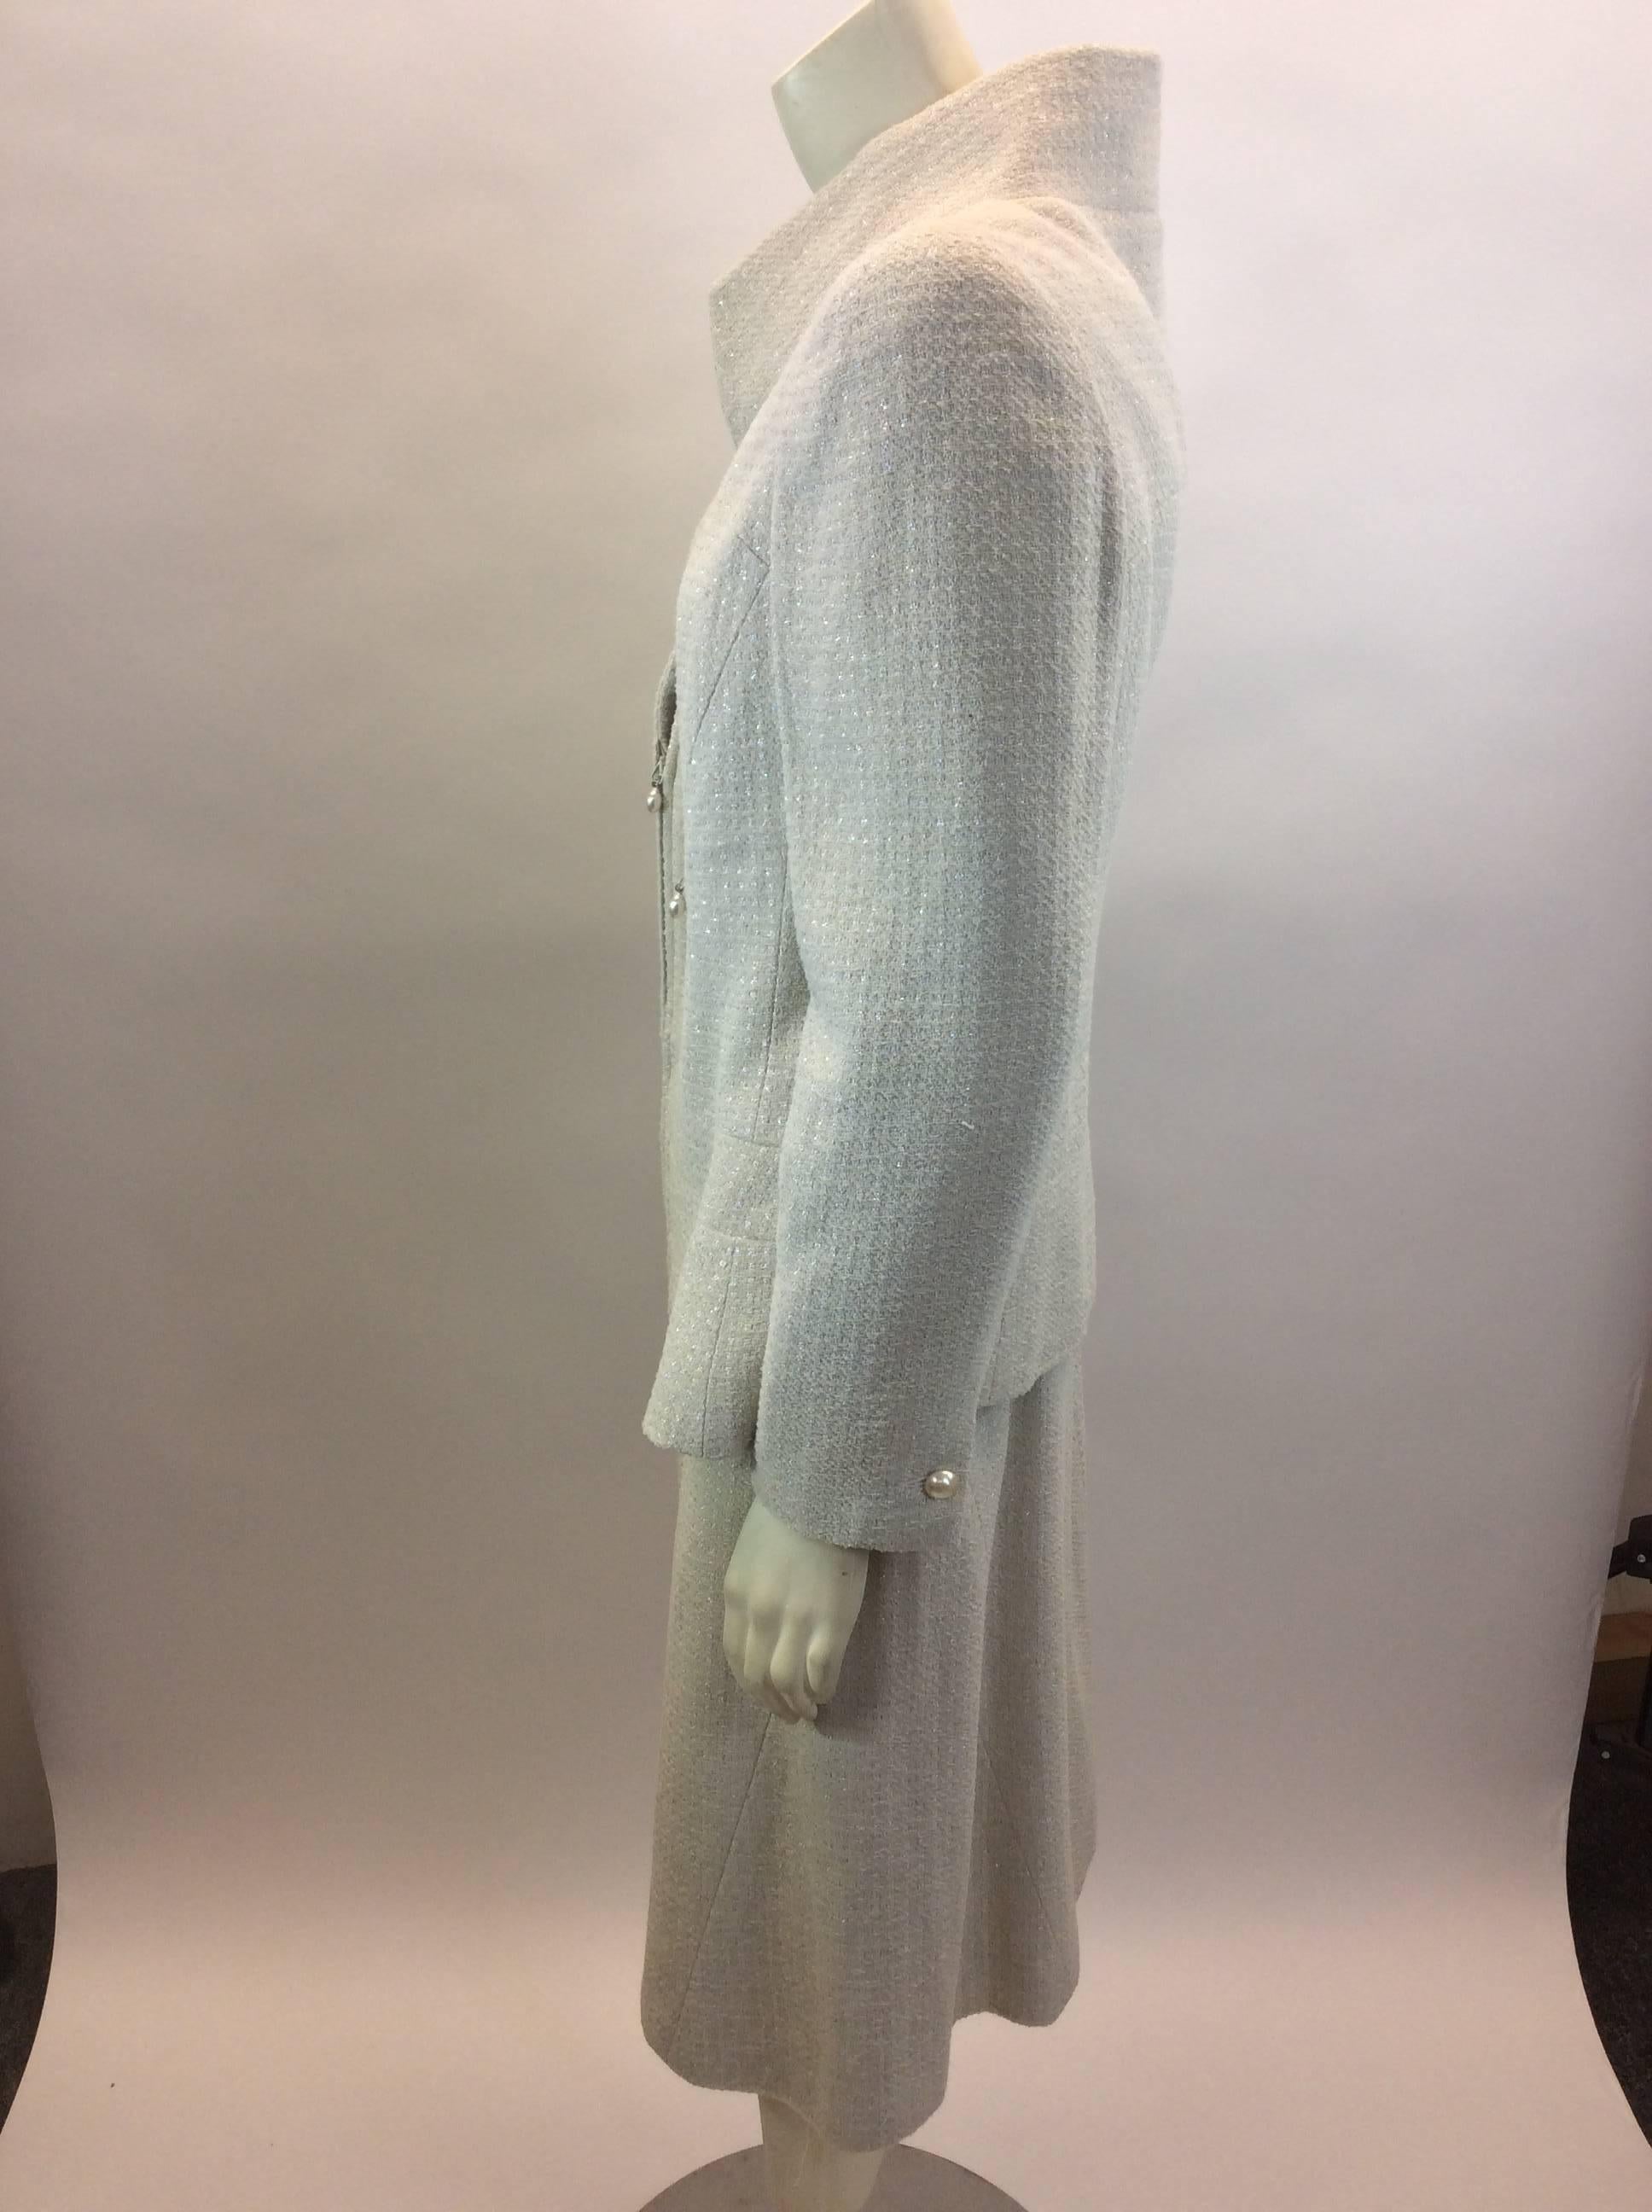 Chanel White Two Piece Skirt Suit
Made in France
$650
Skirt:
Length 22